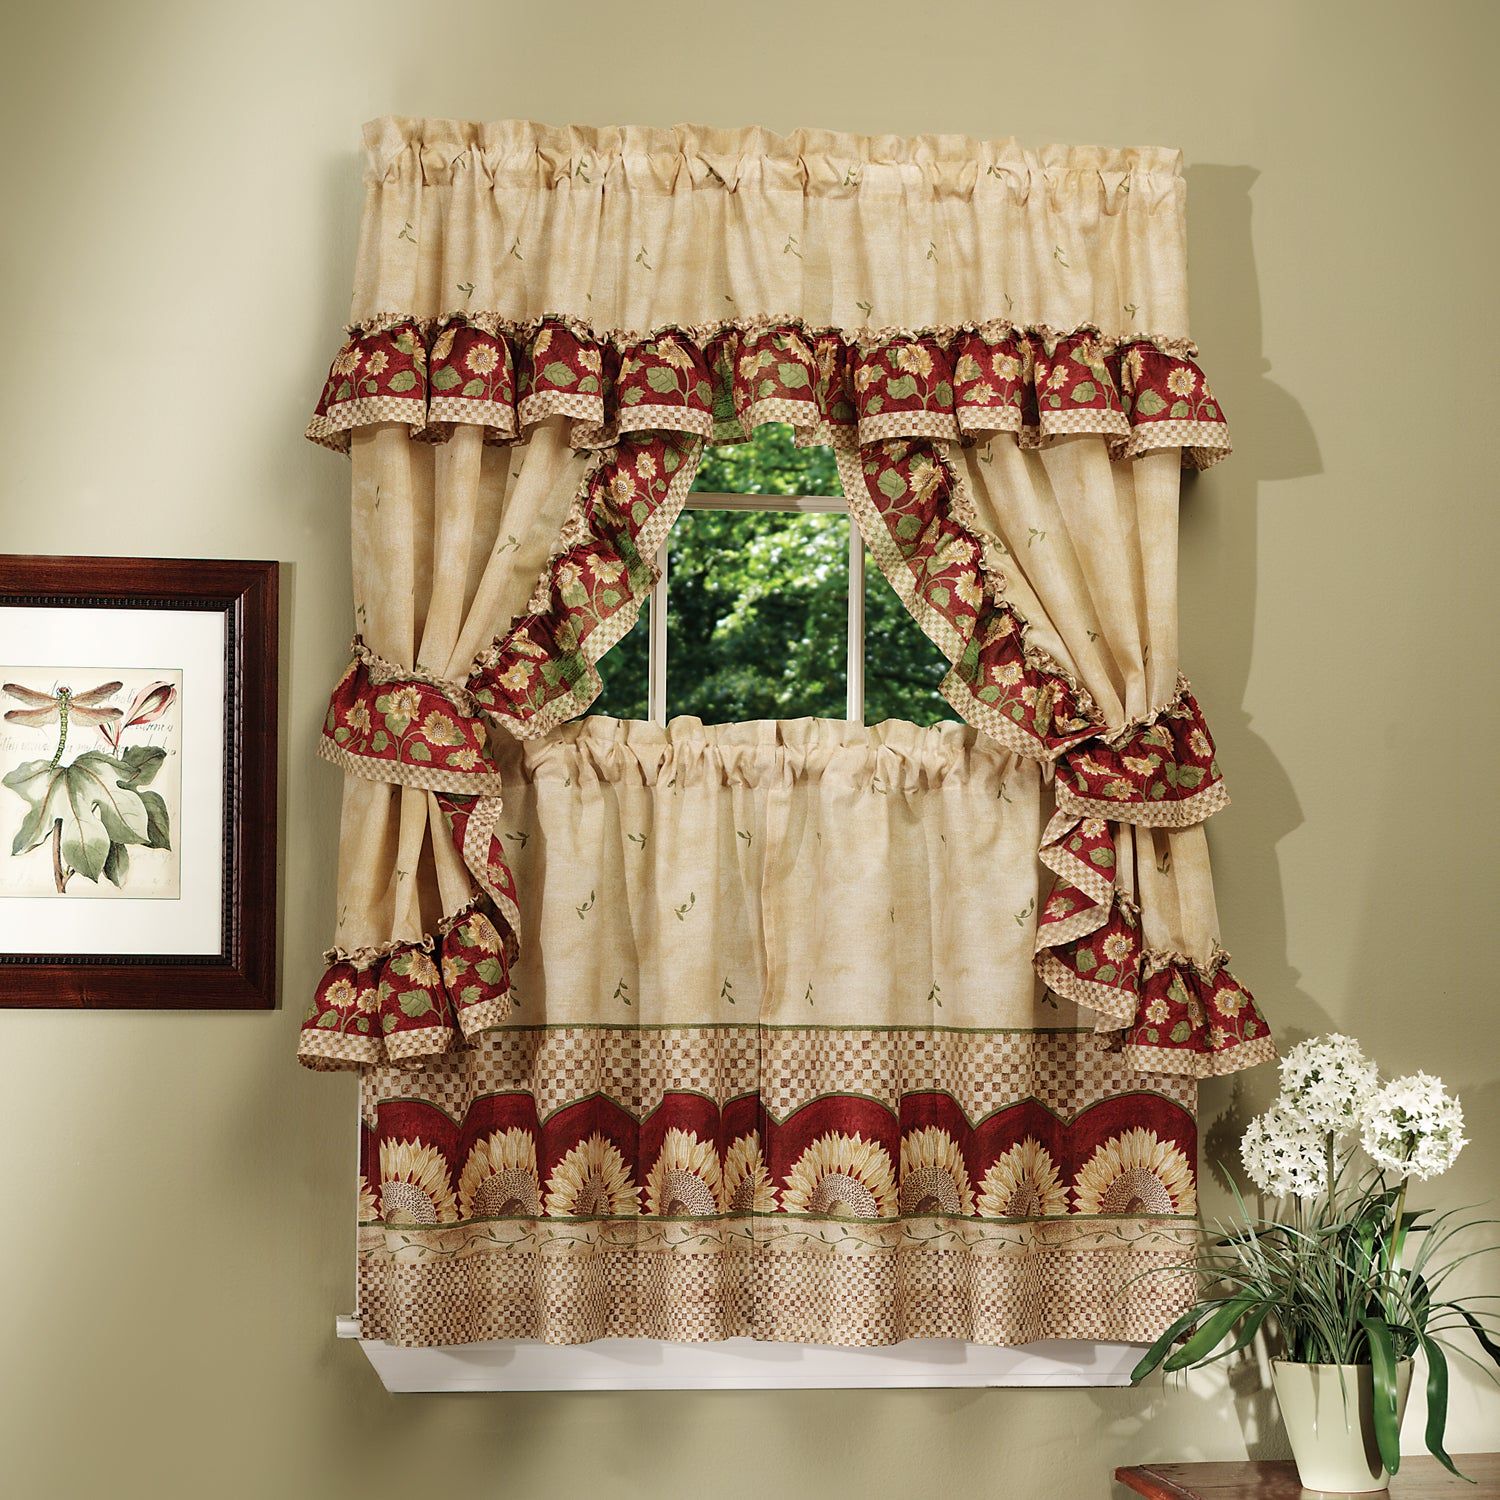 Complete Cottage Curtain Set With A Country Style Sunflower Print – 36 Inch Intended For Window Curtains Sets With Colorful Marketplace Vegetable And Sunflower Print (Photo 2 of 20)